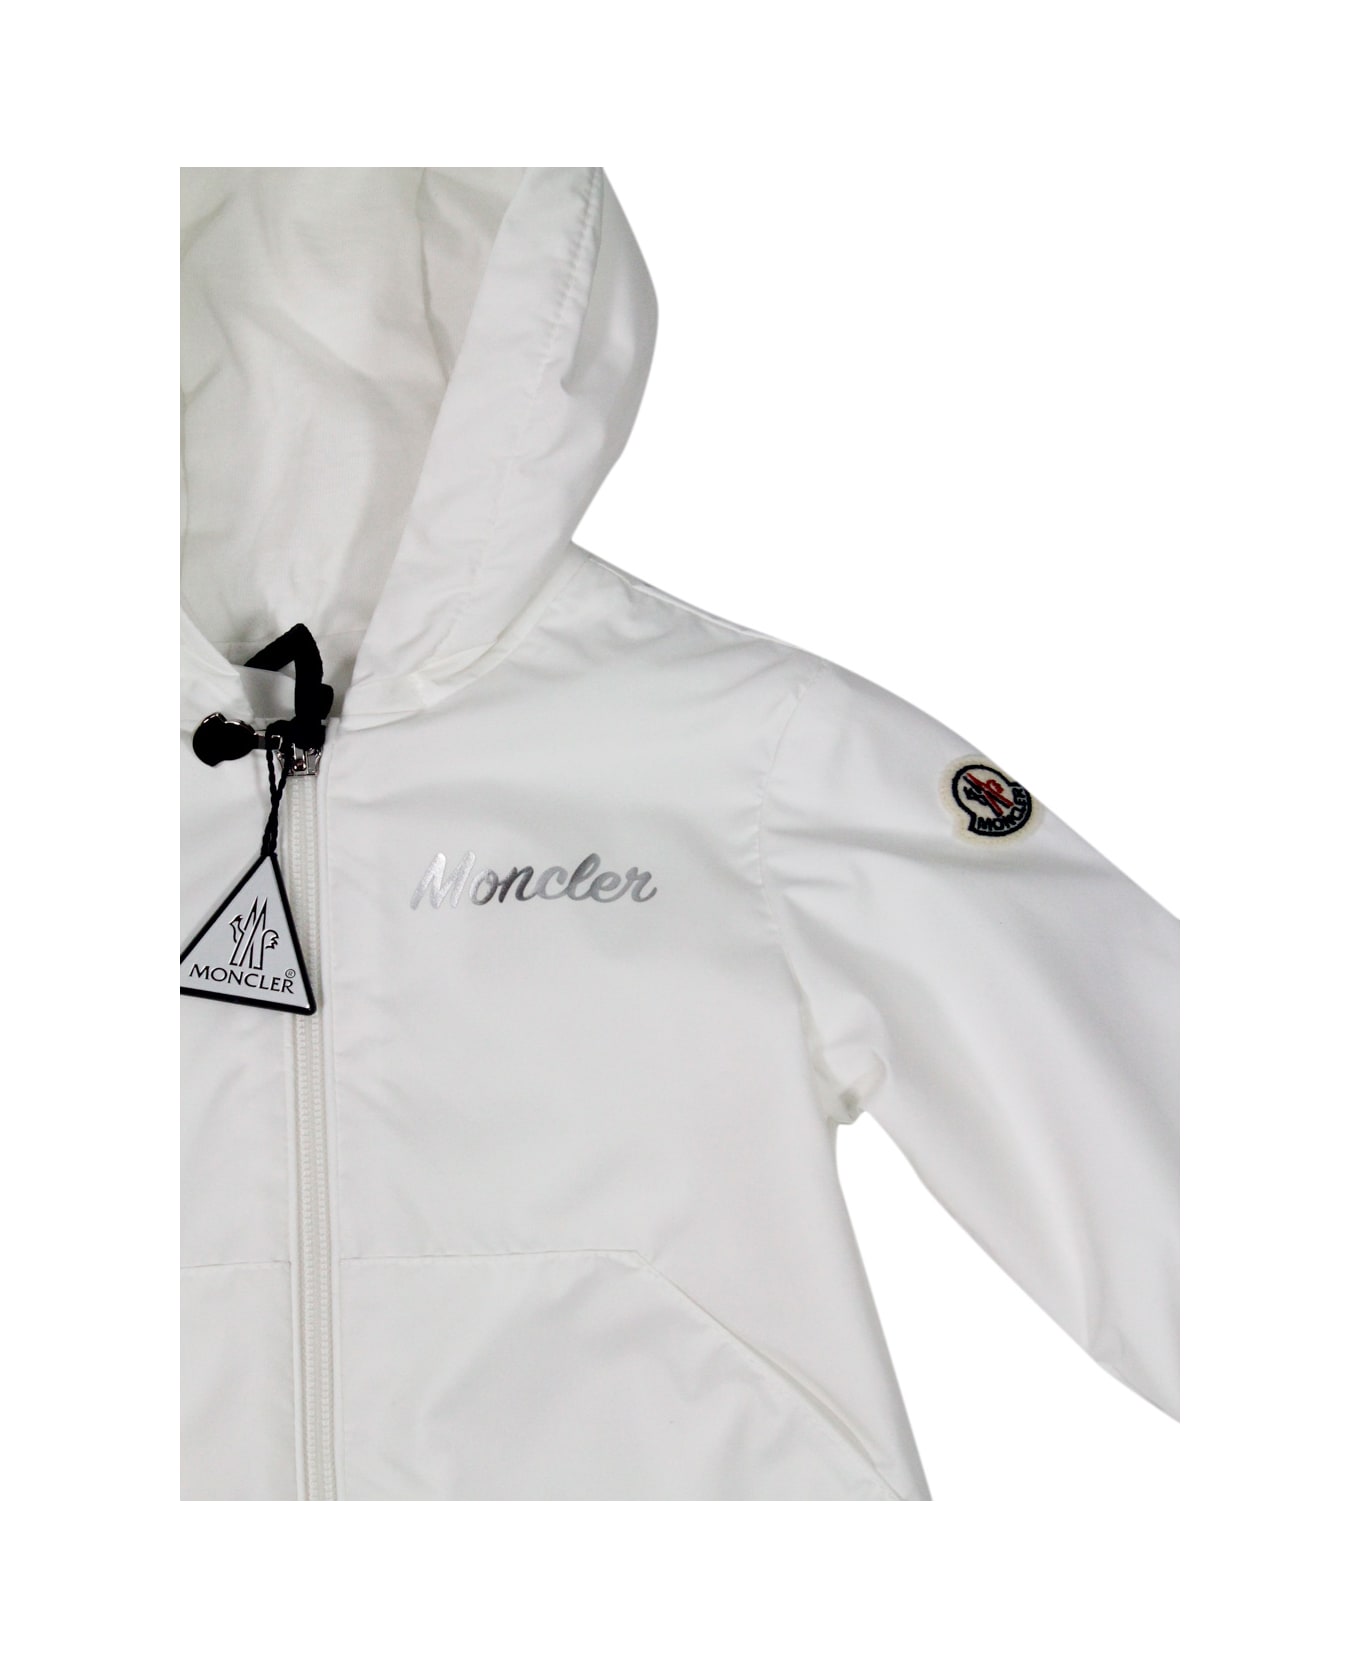 Moncler Evanthe Baby Windproof Jacket With Hood And Zip Closure And Silver Logo Writing On The Chest. - White コート＆ジャケット